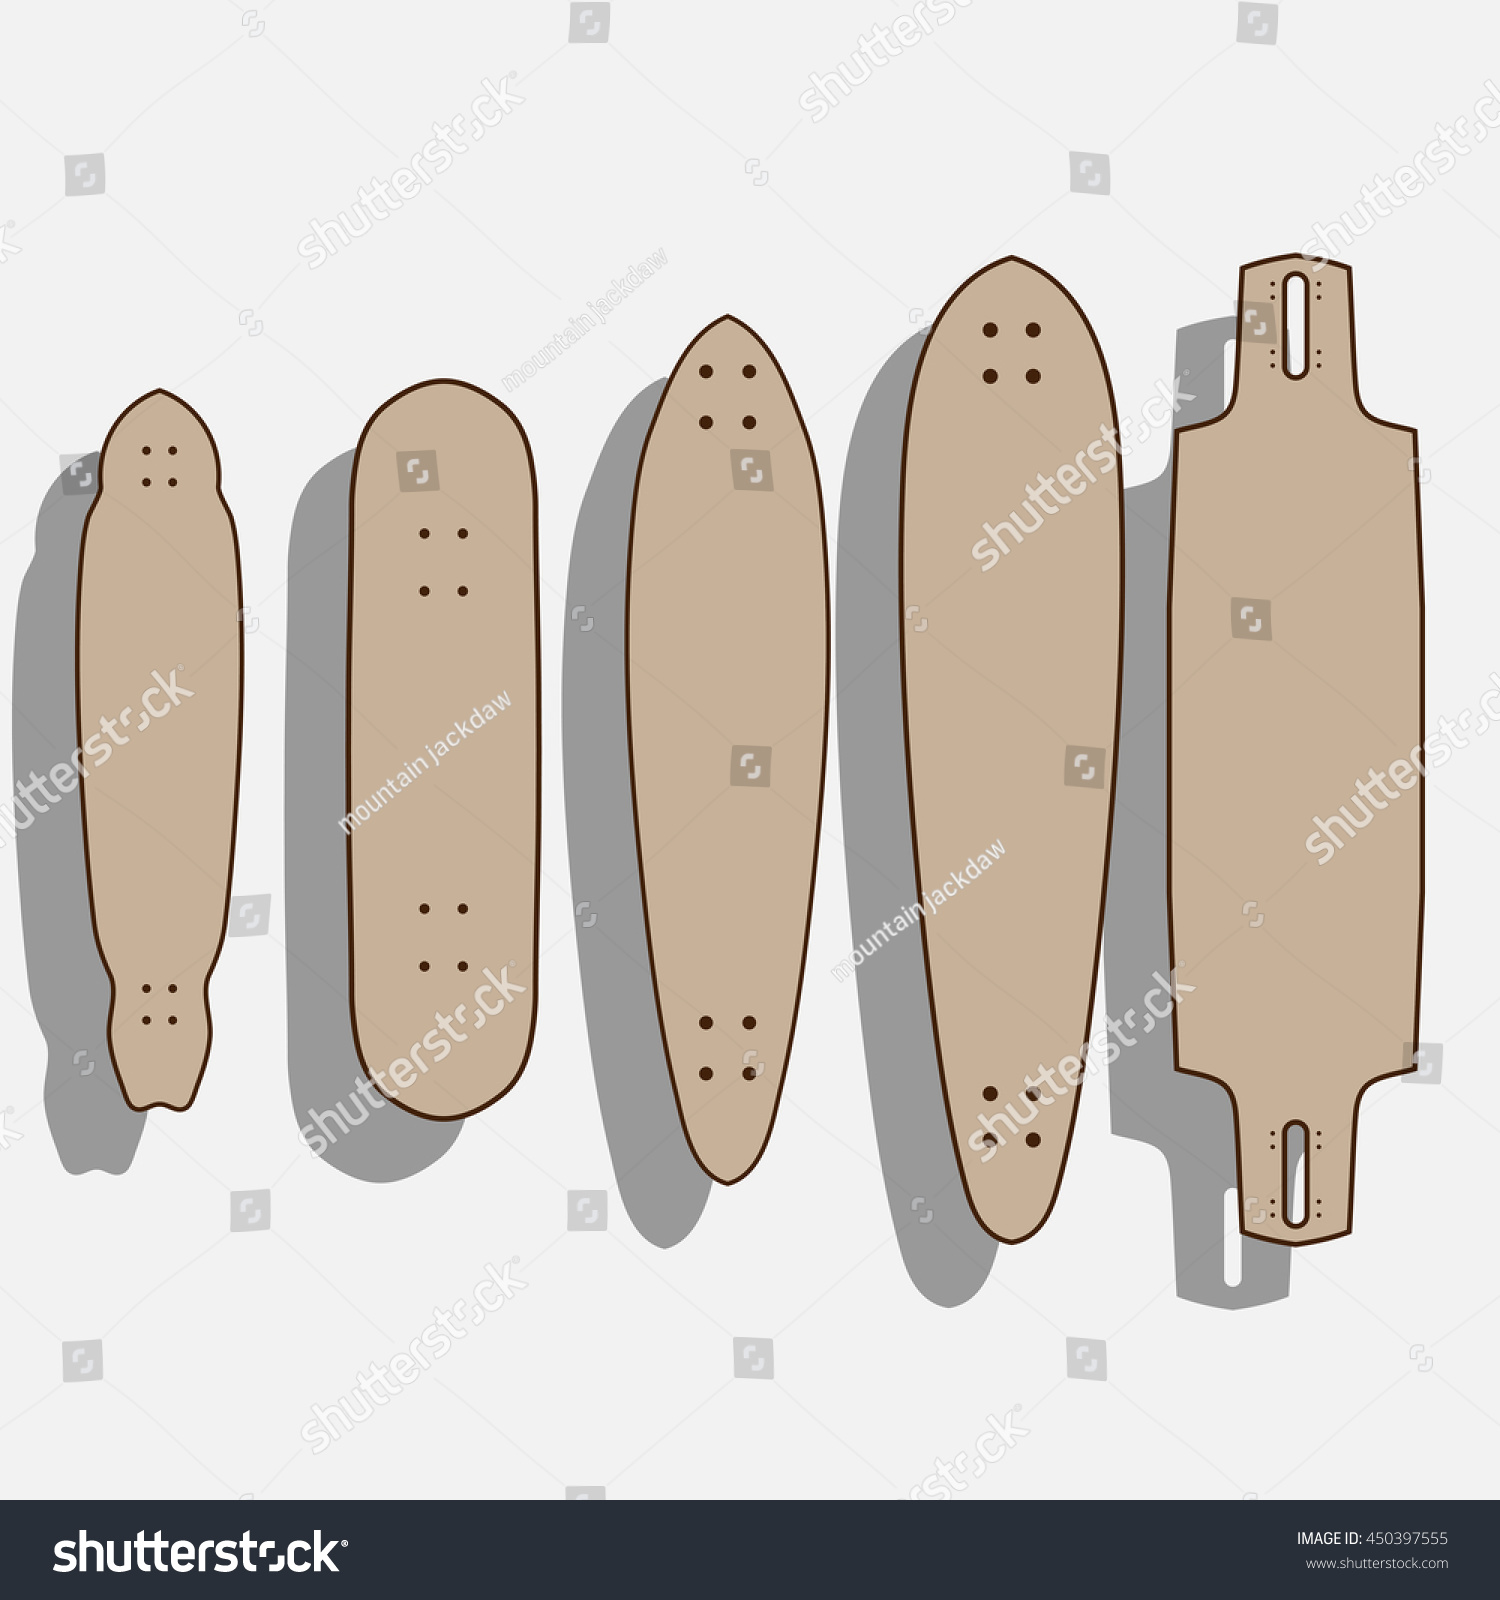 Blank Longboard Template. Different Forms Of Longboards And Skateboards